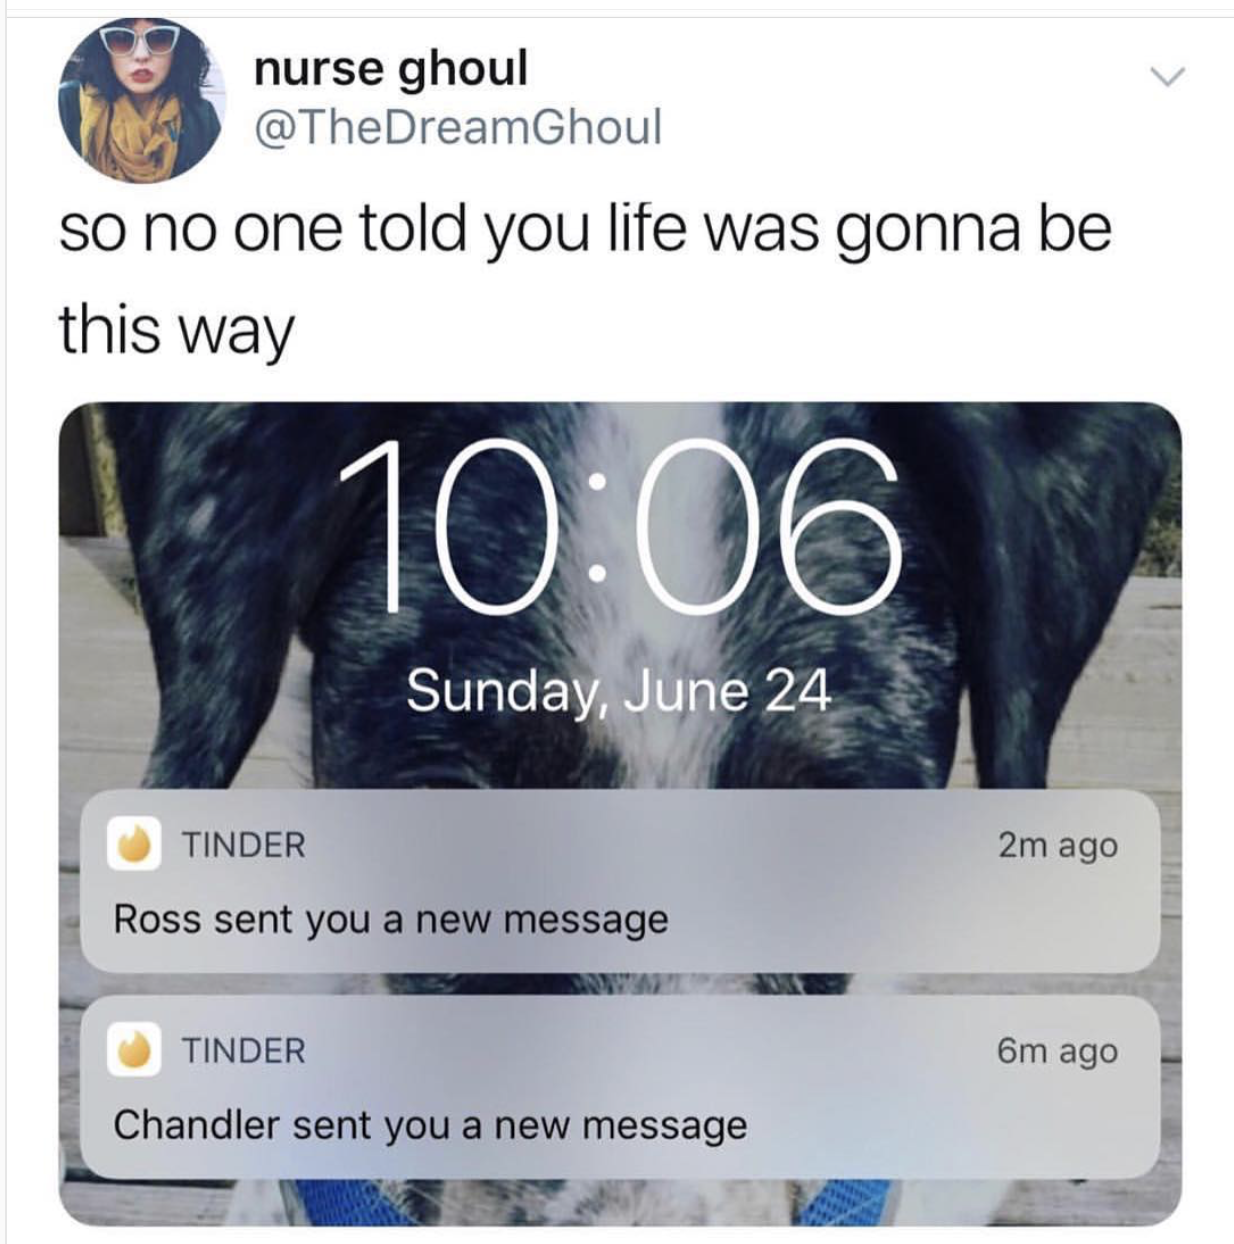 so no one told you life was gonna be this way tinder - nurse ghoul so no one told you life was gonna be this way Sunday, June 24 Tinder 2m ago Ross sent you a new message Tinder 6m ago Chandler sent you a new message